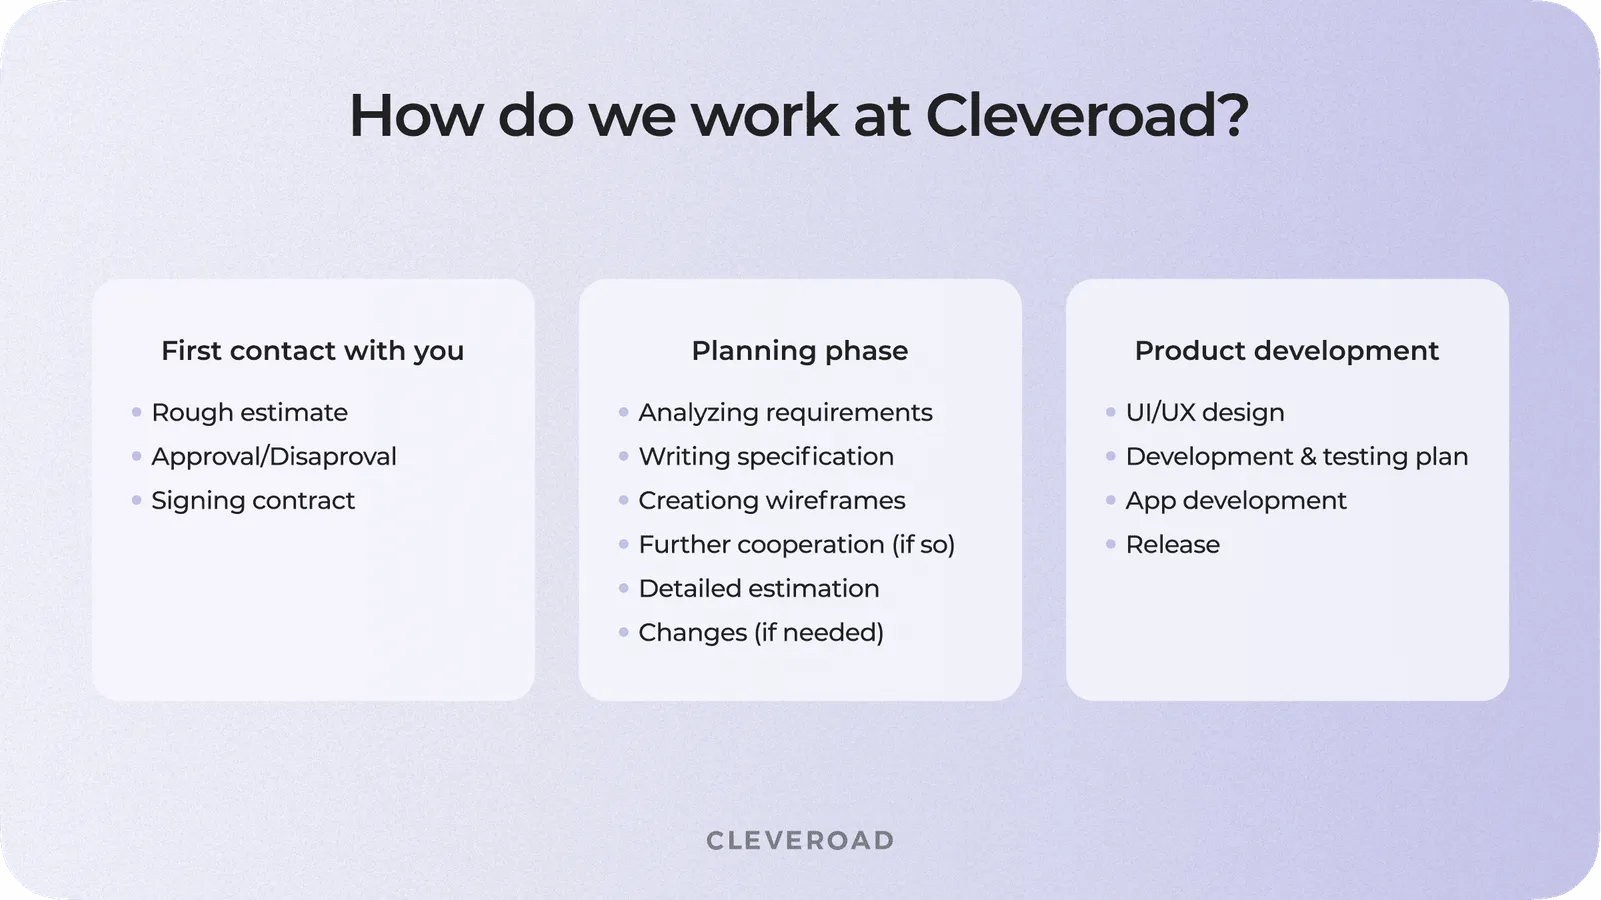 How do we work at Cleveroad?